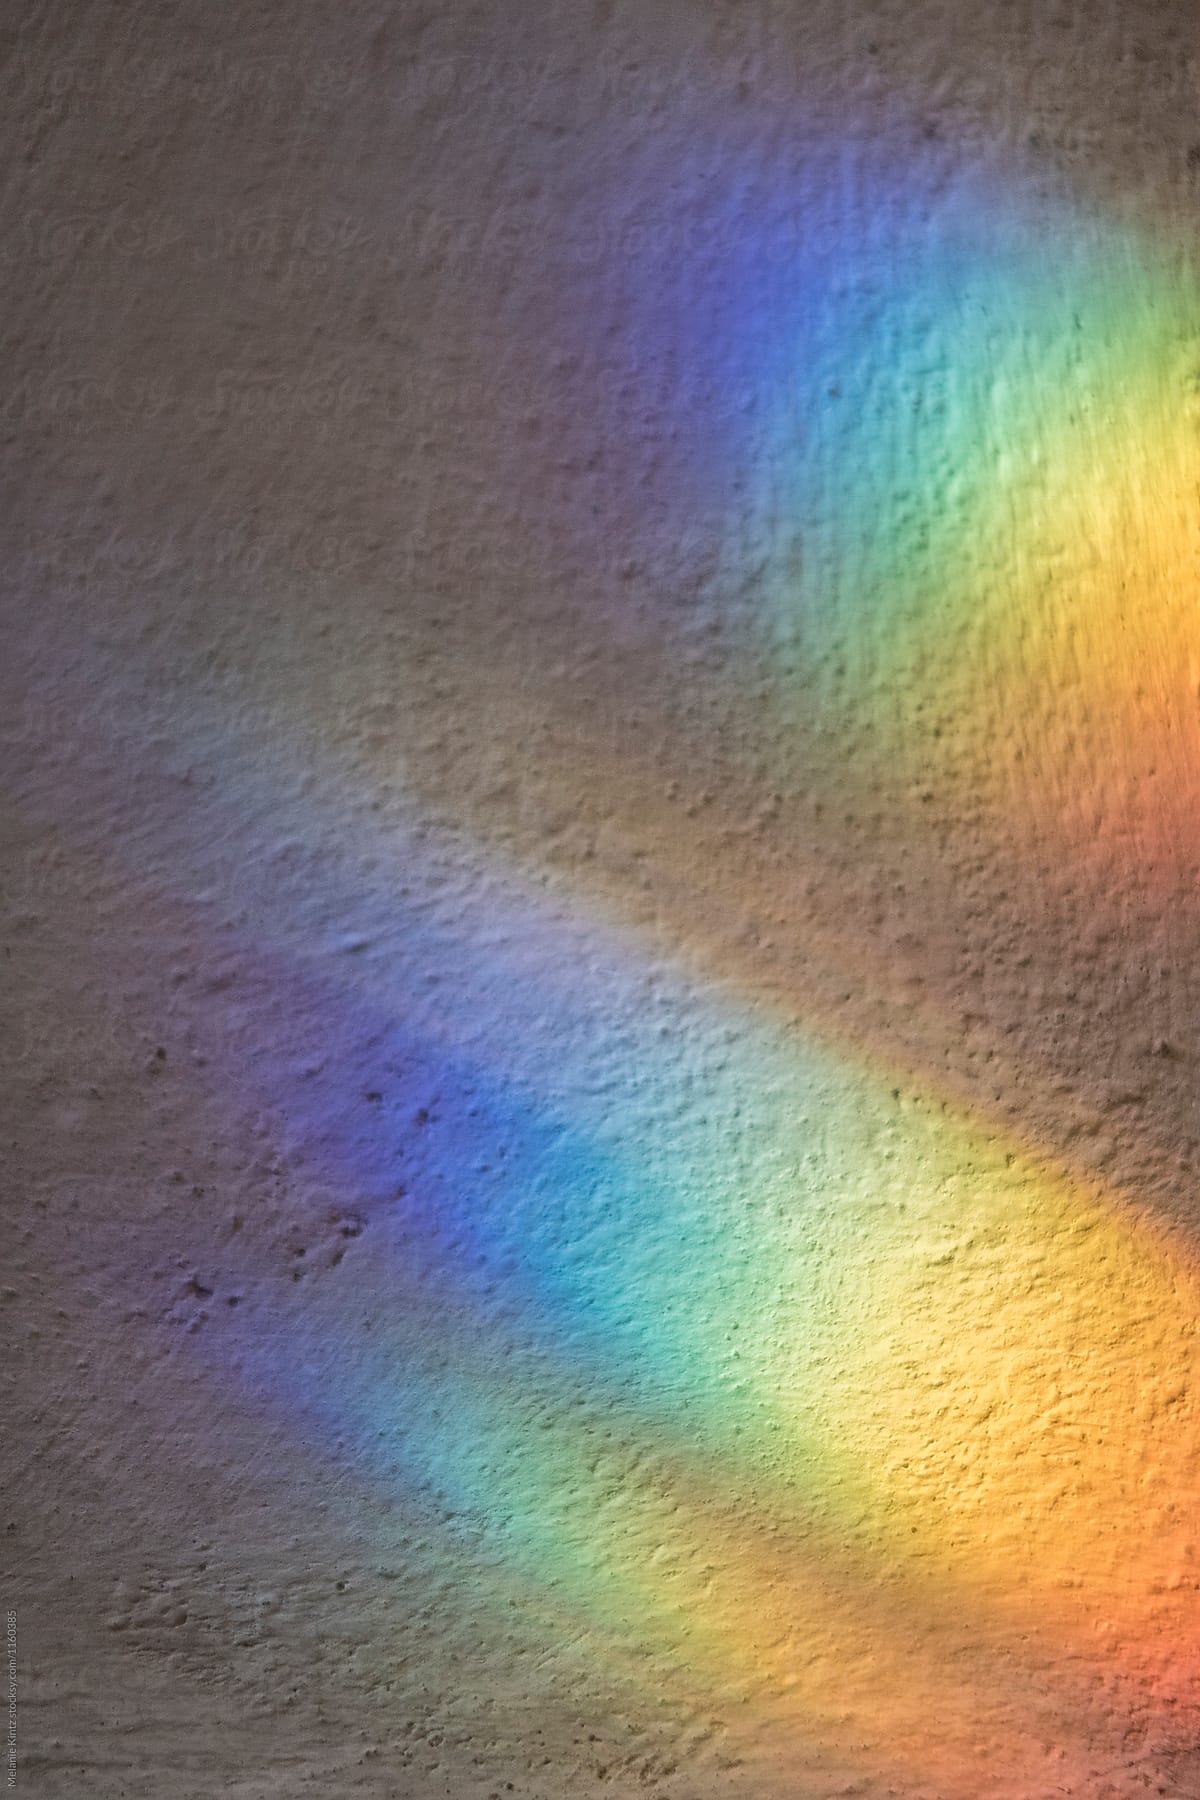 Spectral colors being cast onto a wall